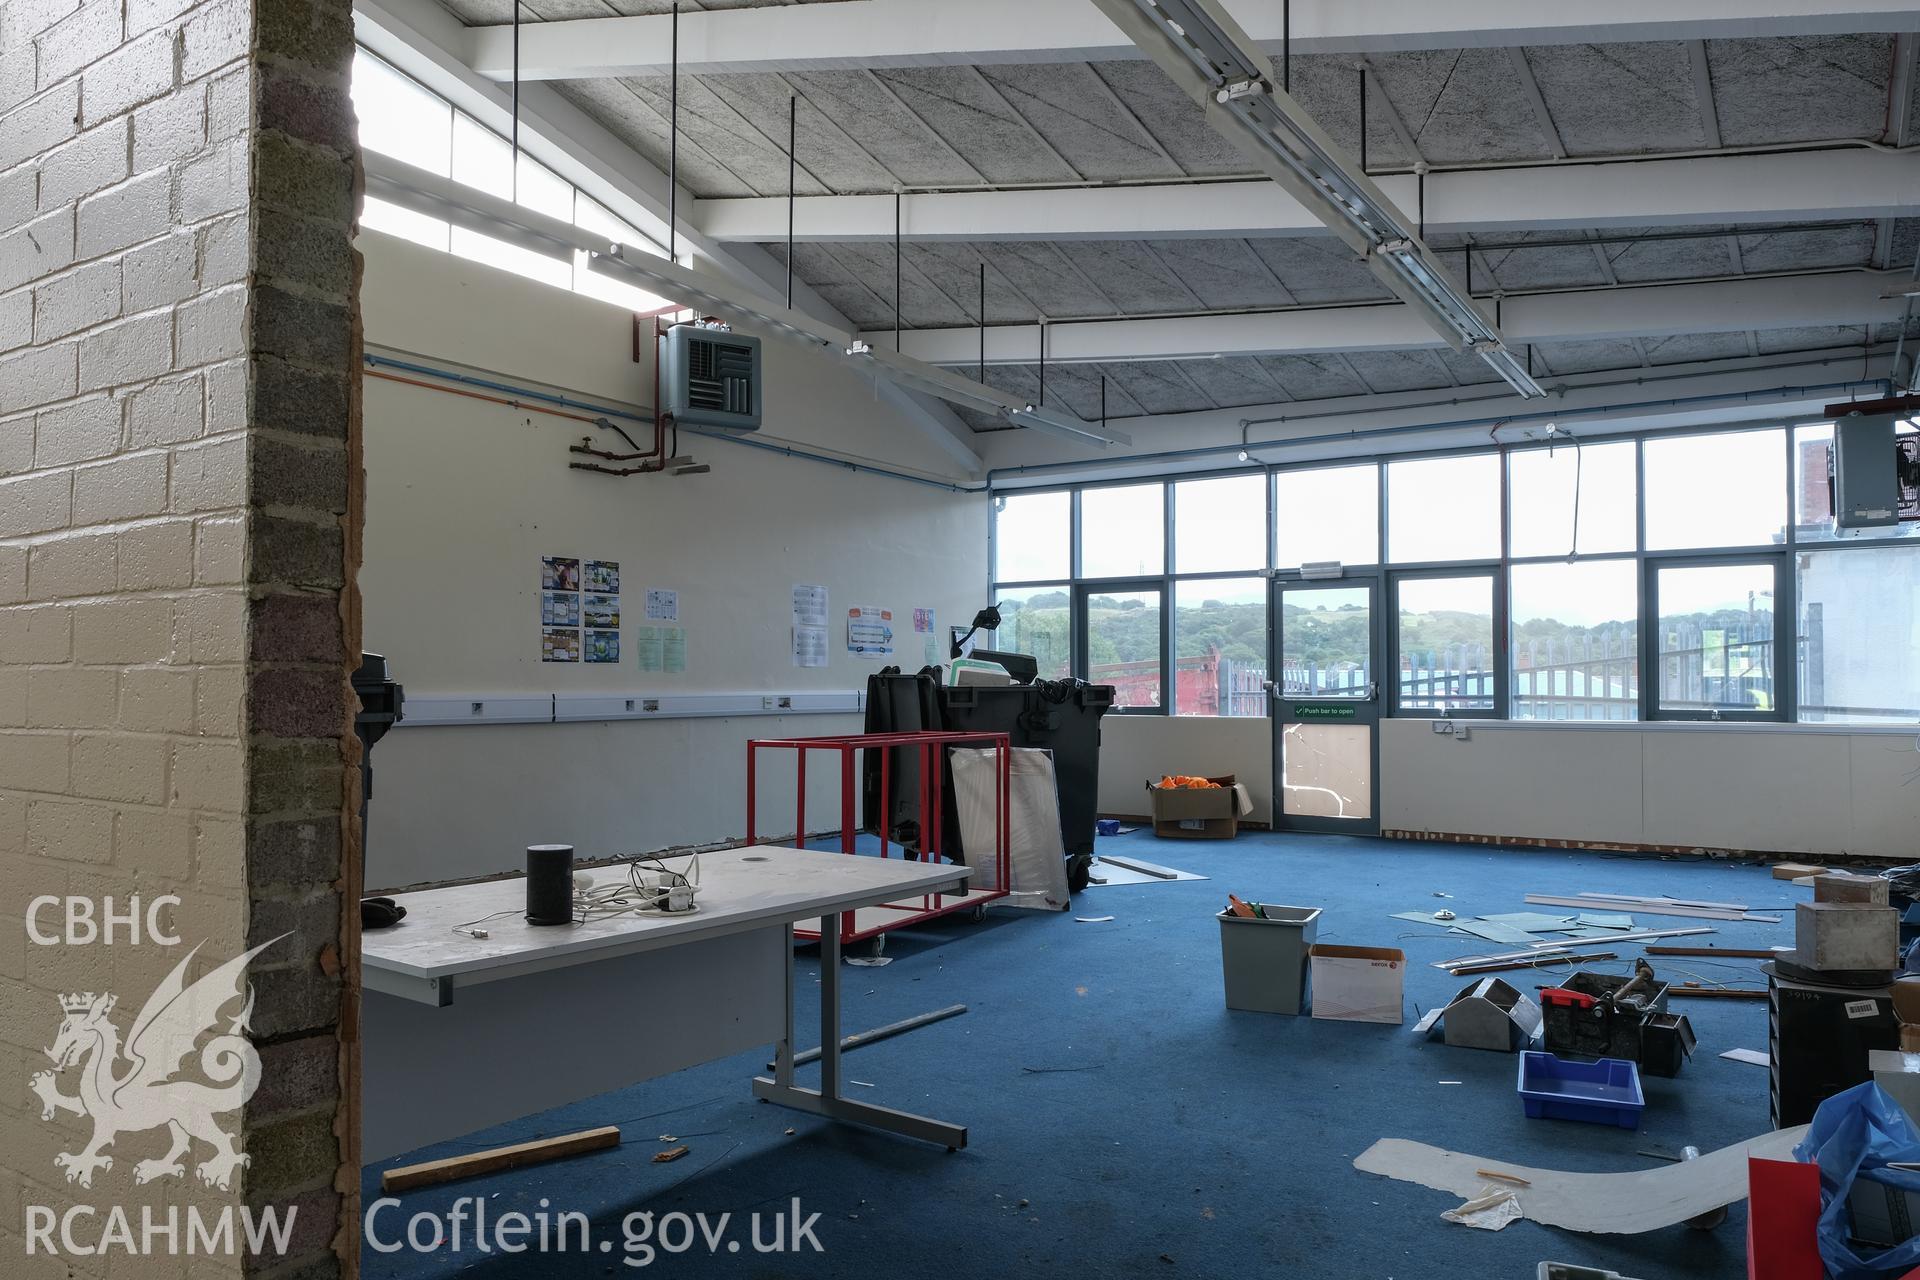 Digital colour photograph showing detailed interior view of classroom at Caernarfonshire Technical College, Ffriddoedd Road, Bangor. Photographed by Dilys Morgan and donated by Wyn Thomas of Grwp Llandrillo-Menai Further Education College, 2019.